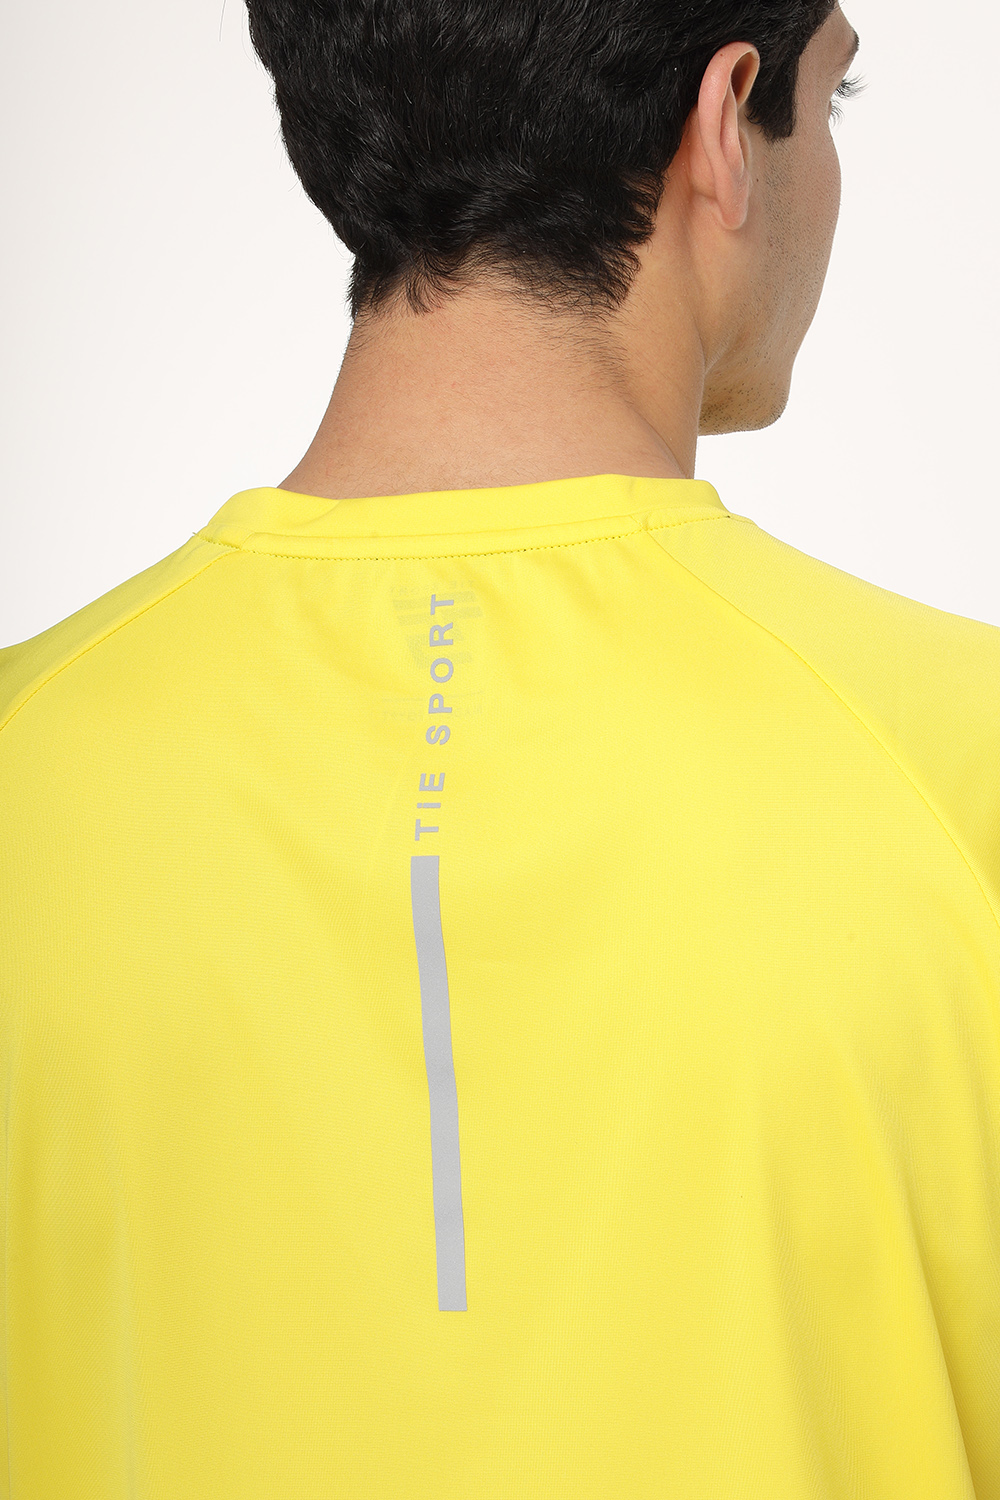 Regular Fit Sports T-Shirt Yellow - TIE HOUSE